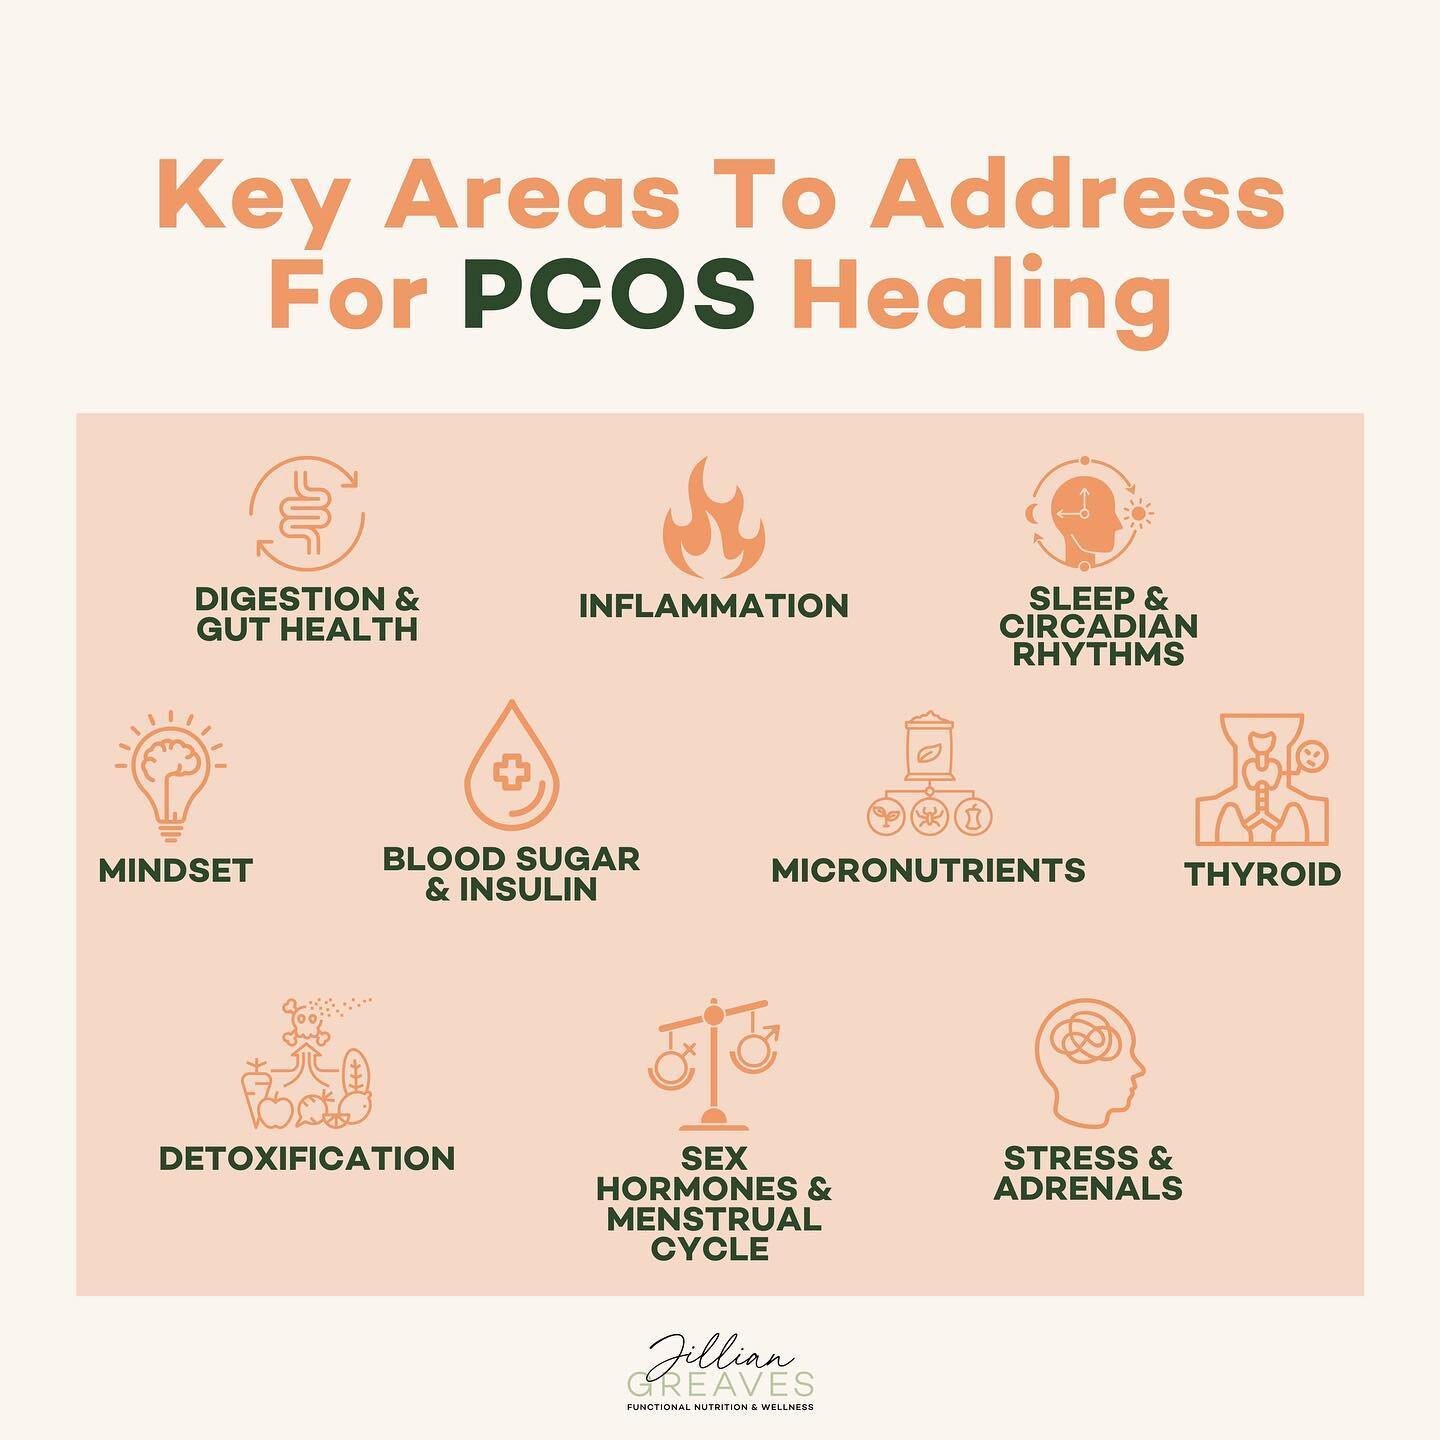 Addressing your PCOS naturally requires a whole health approach ✨

PCOS is a complex metabolic and endocrine disorder impacting an estimated 1 in 10 women (aka&hellip;it&rsquo;s incredibly common!).

Despite how common PCOS is&hellip;..it&rsquo;s not